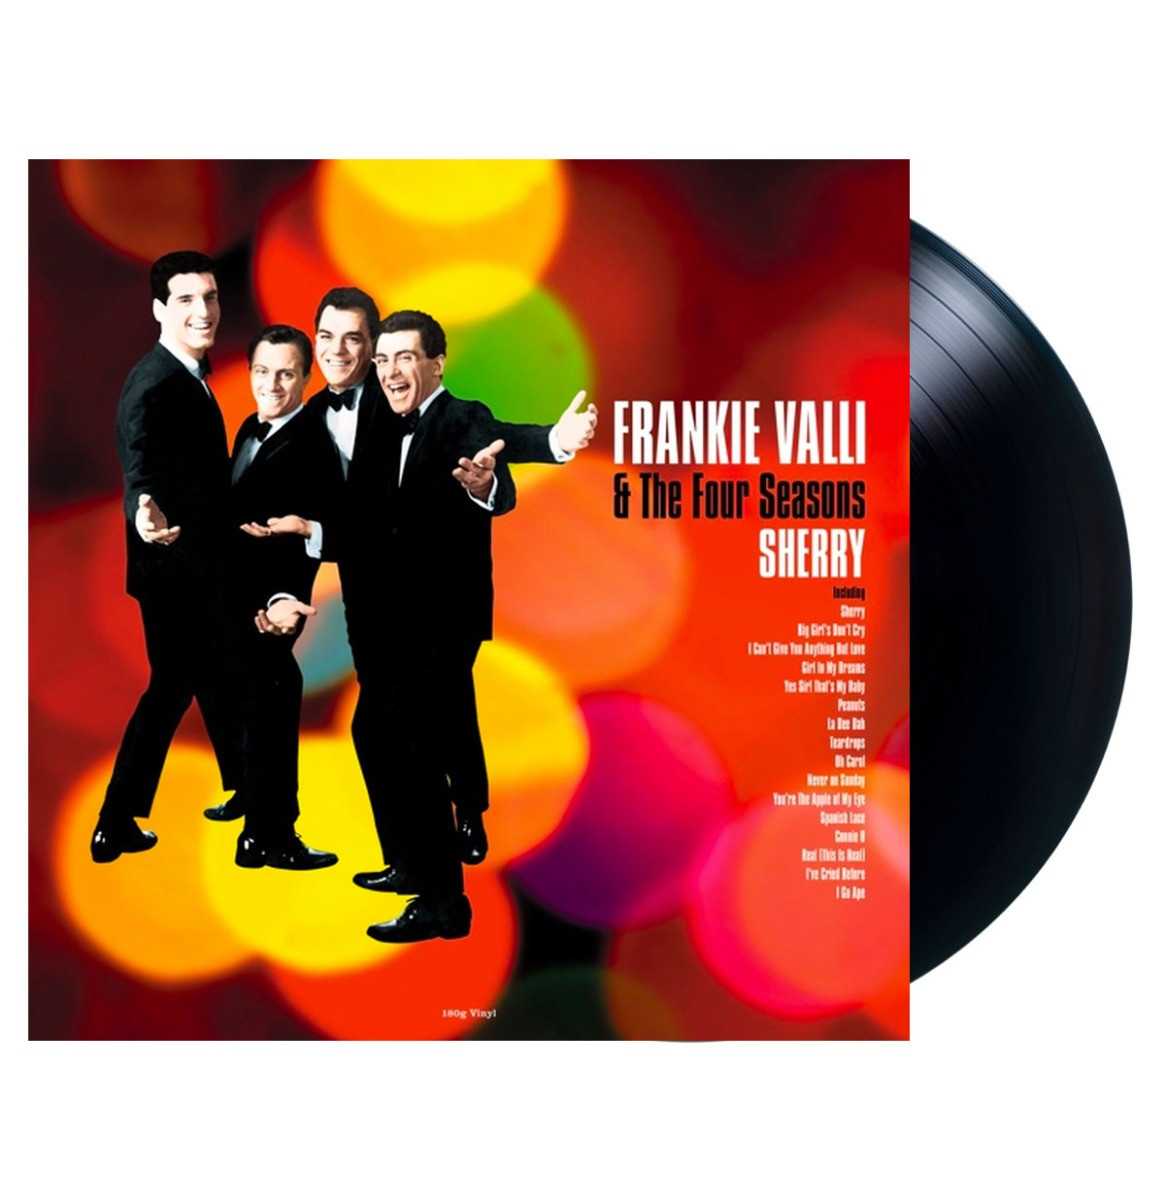 Frankie Valli And The Four Seasons - Sherry LP